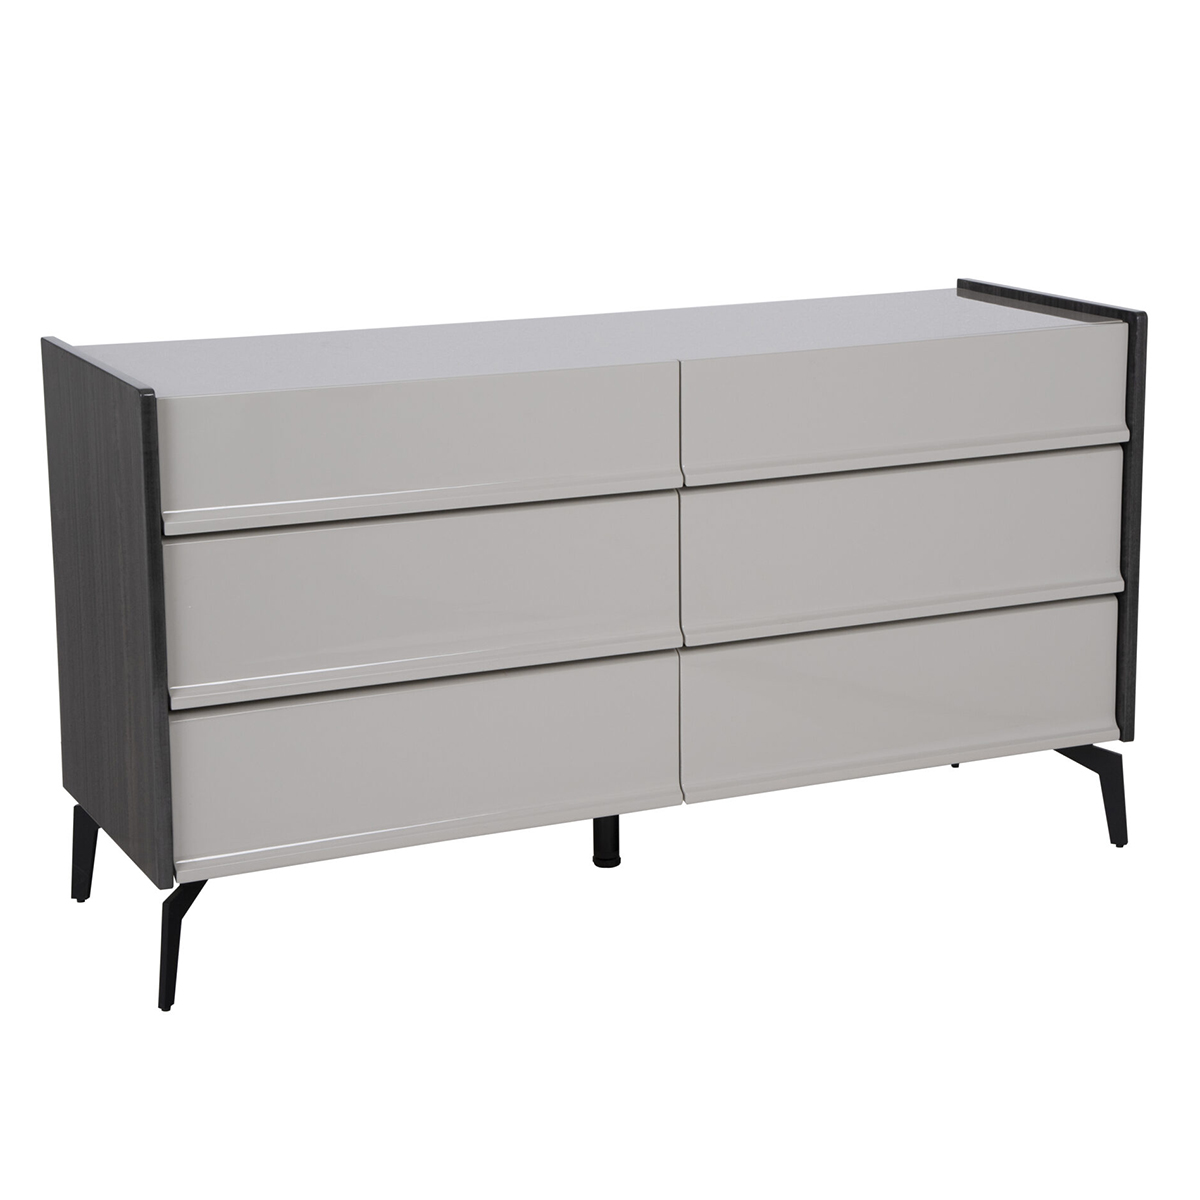 Bellway Slate Grey & Cashmere 6 Drawer Chest